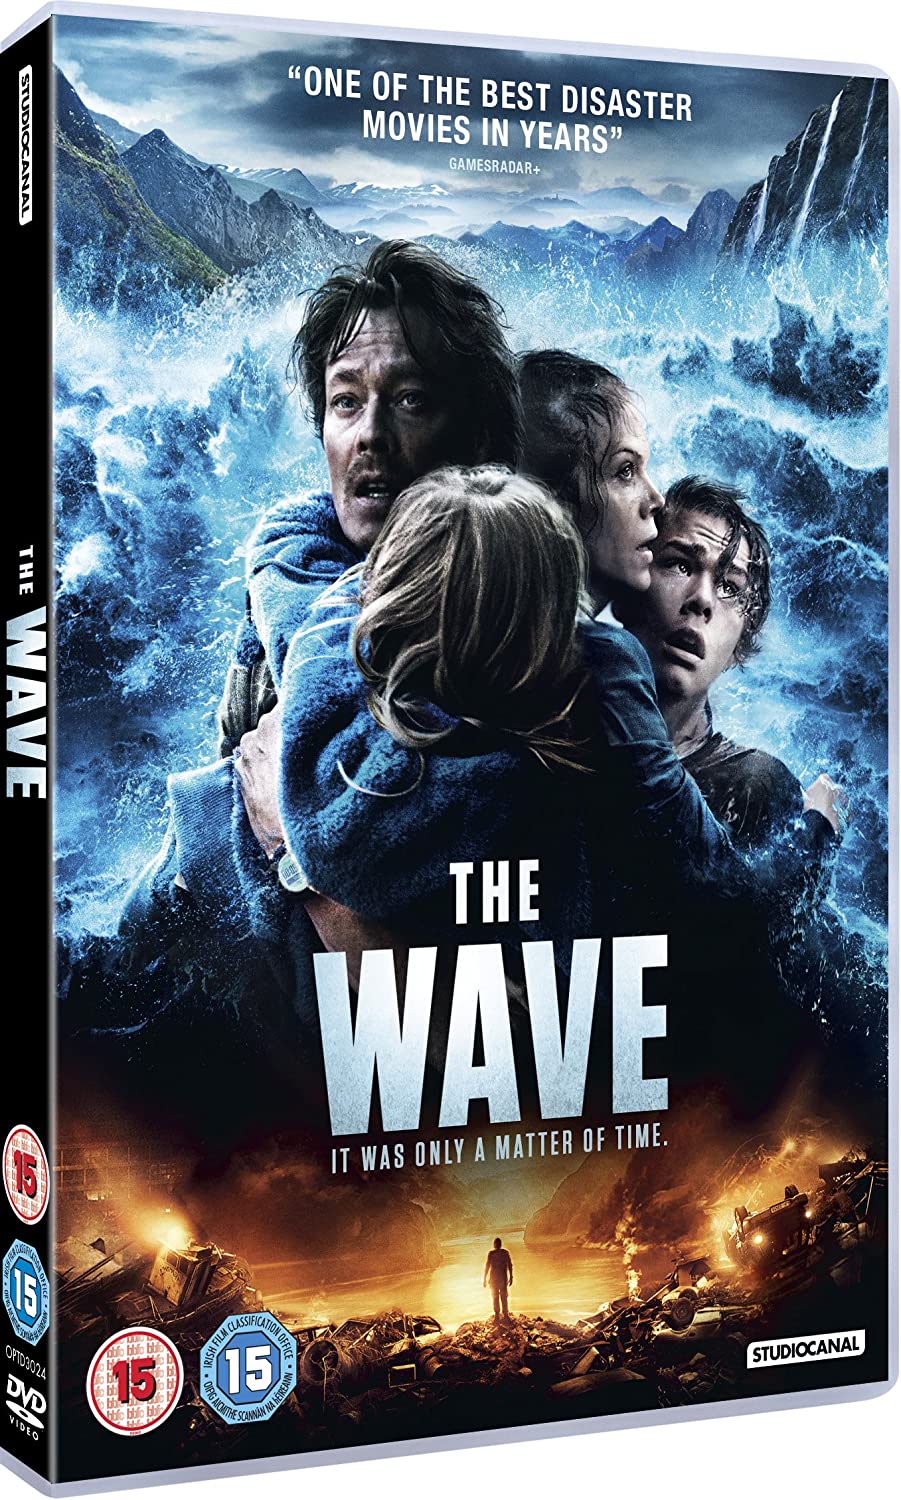 The Wave [2016] - Thriller/Action [DVD]